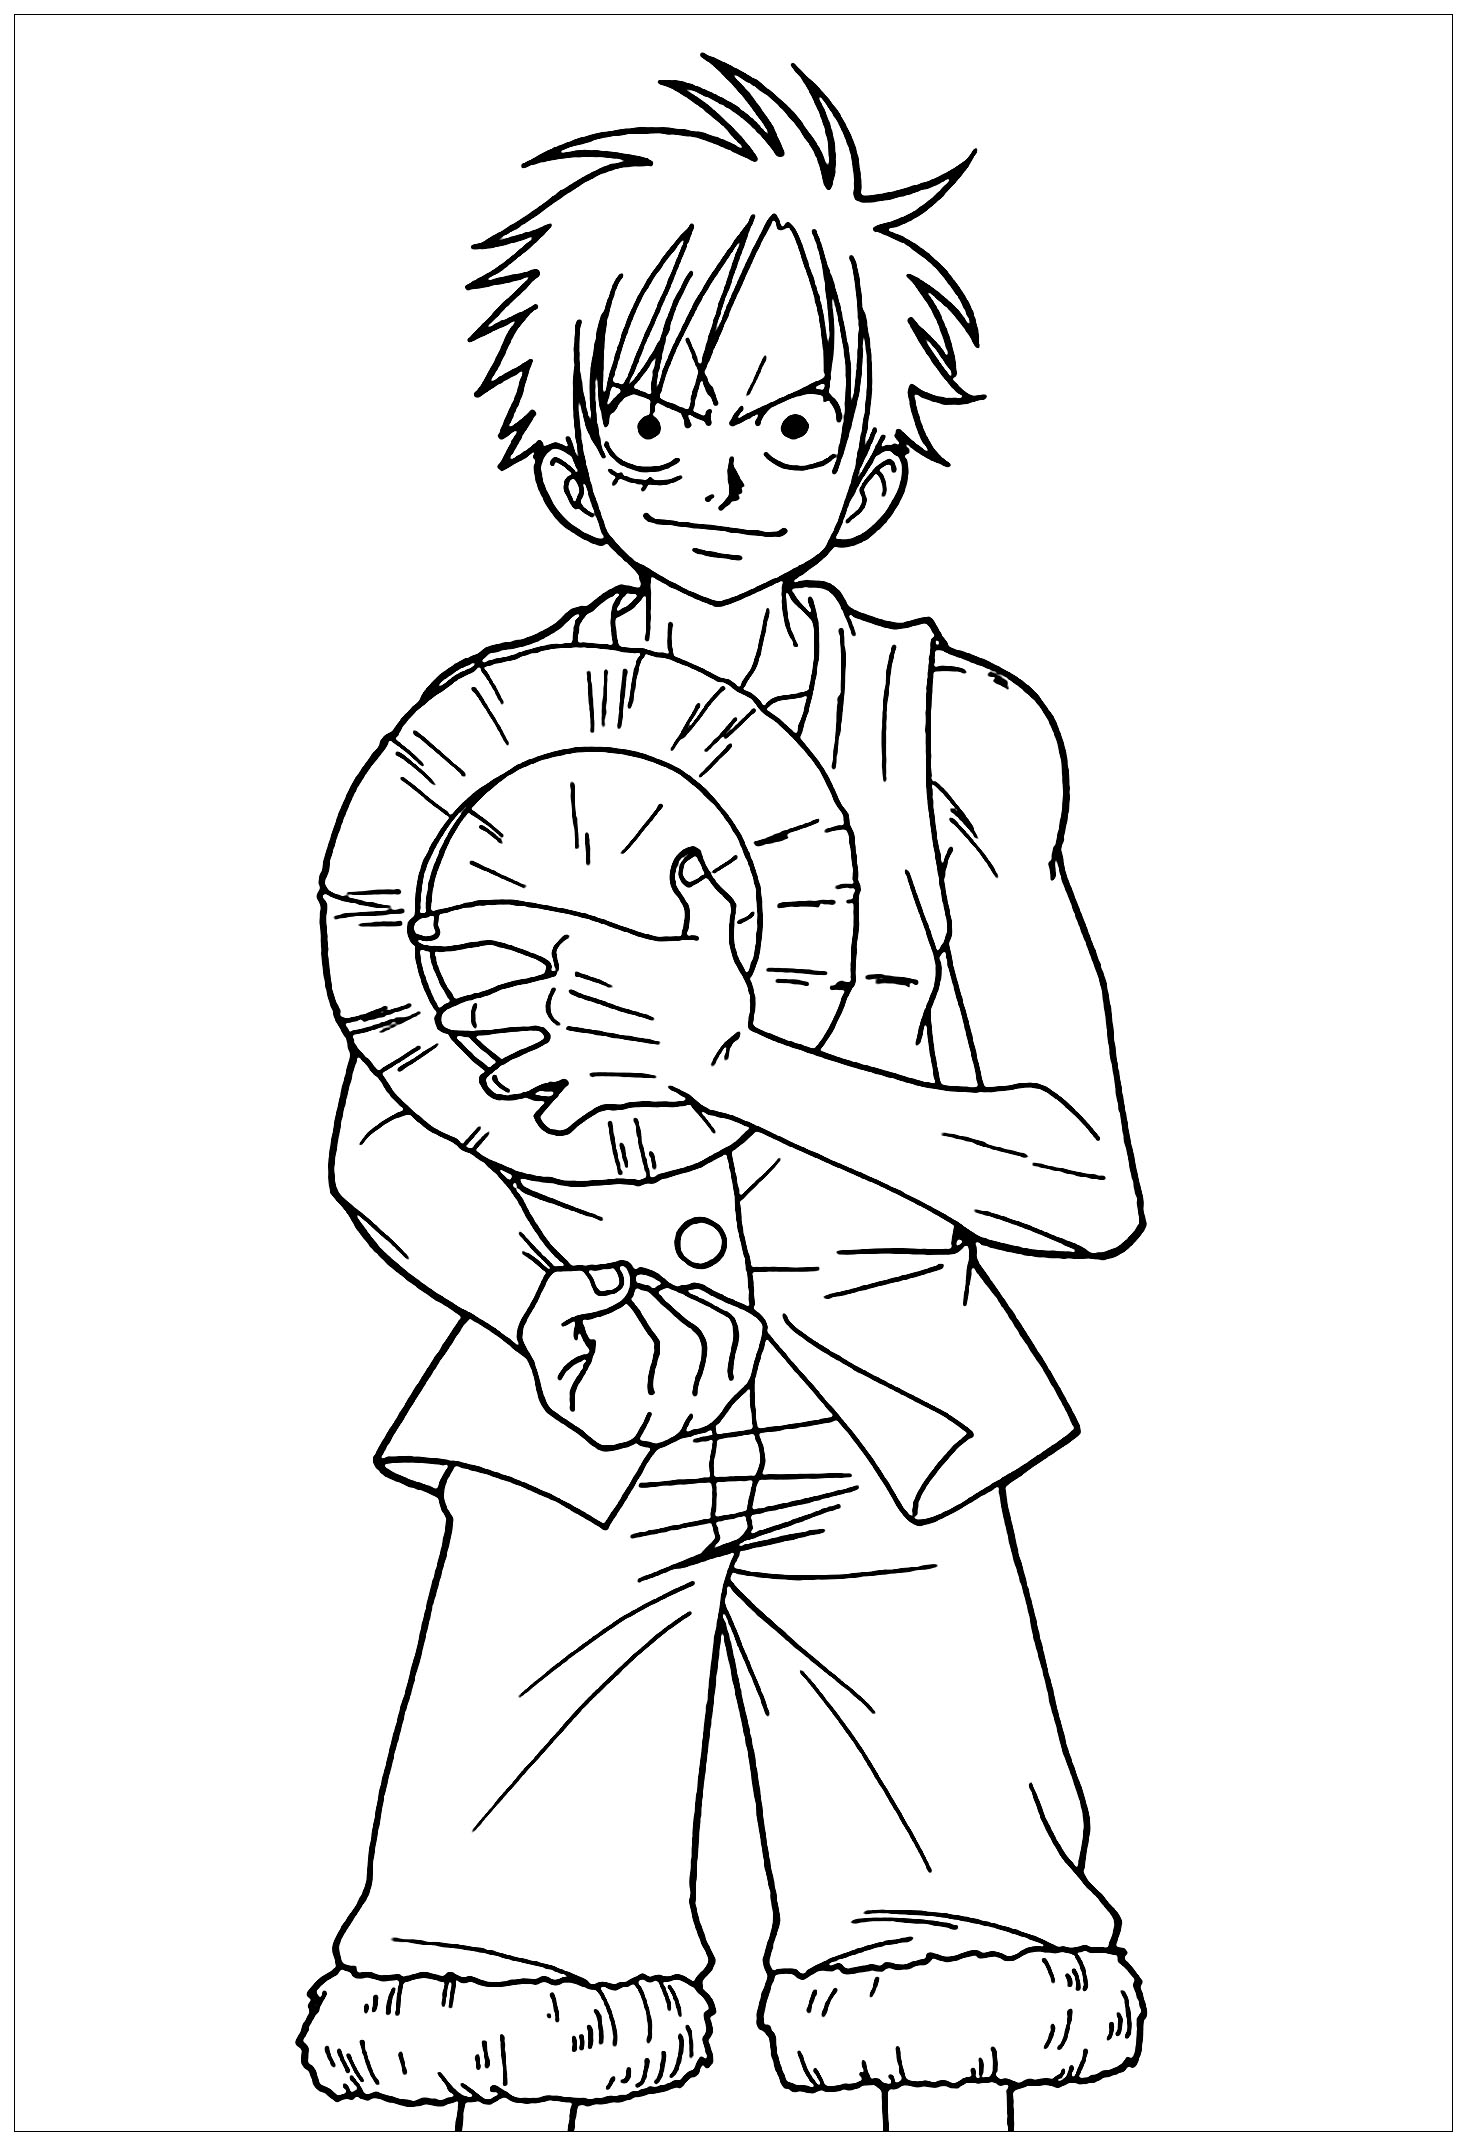 Suit Luffy Shanks Sketch Coloring Page